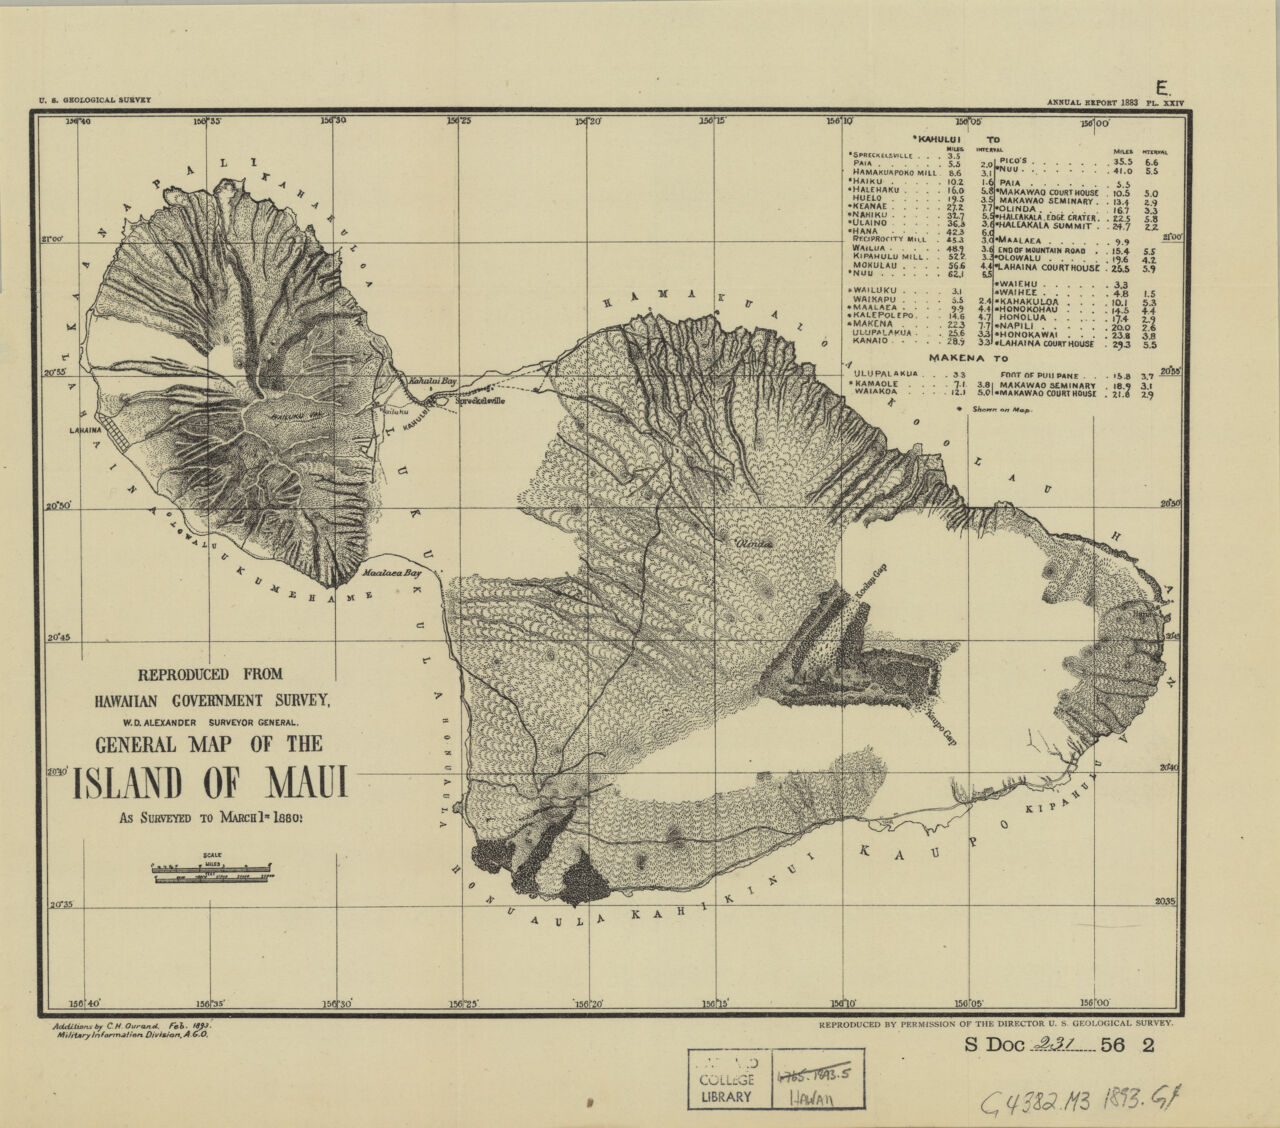 1893 General map of the island of Maui